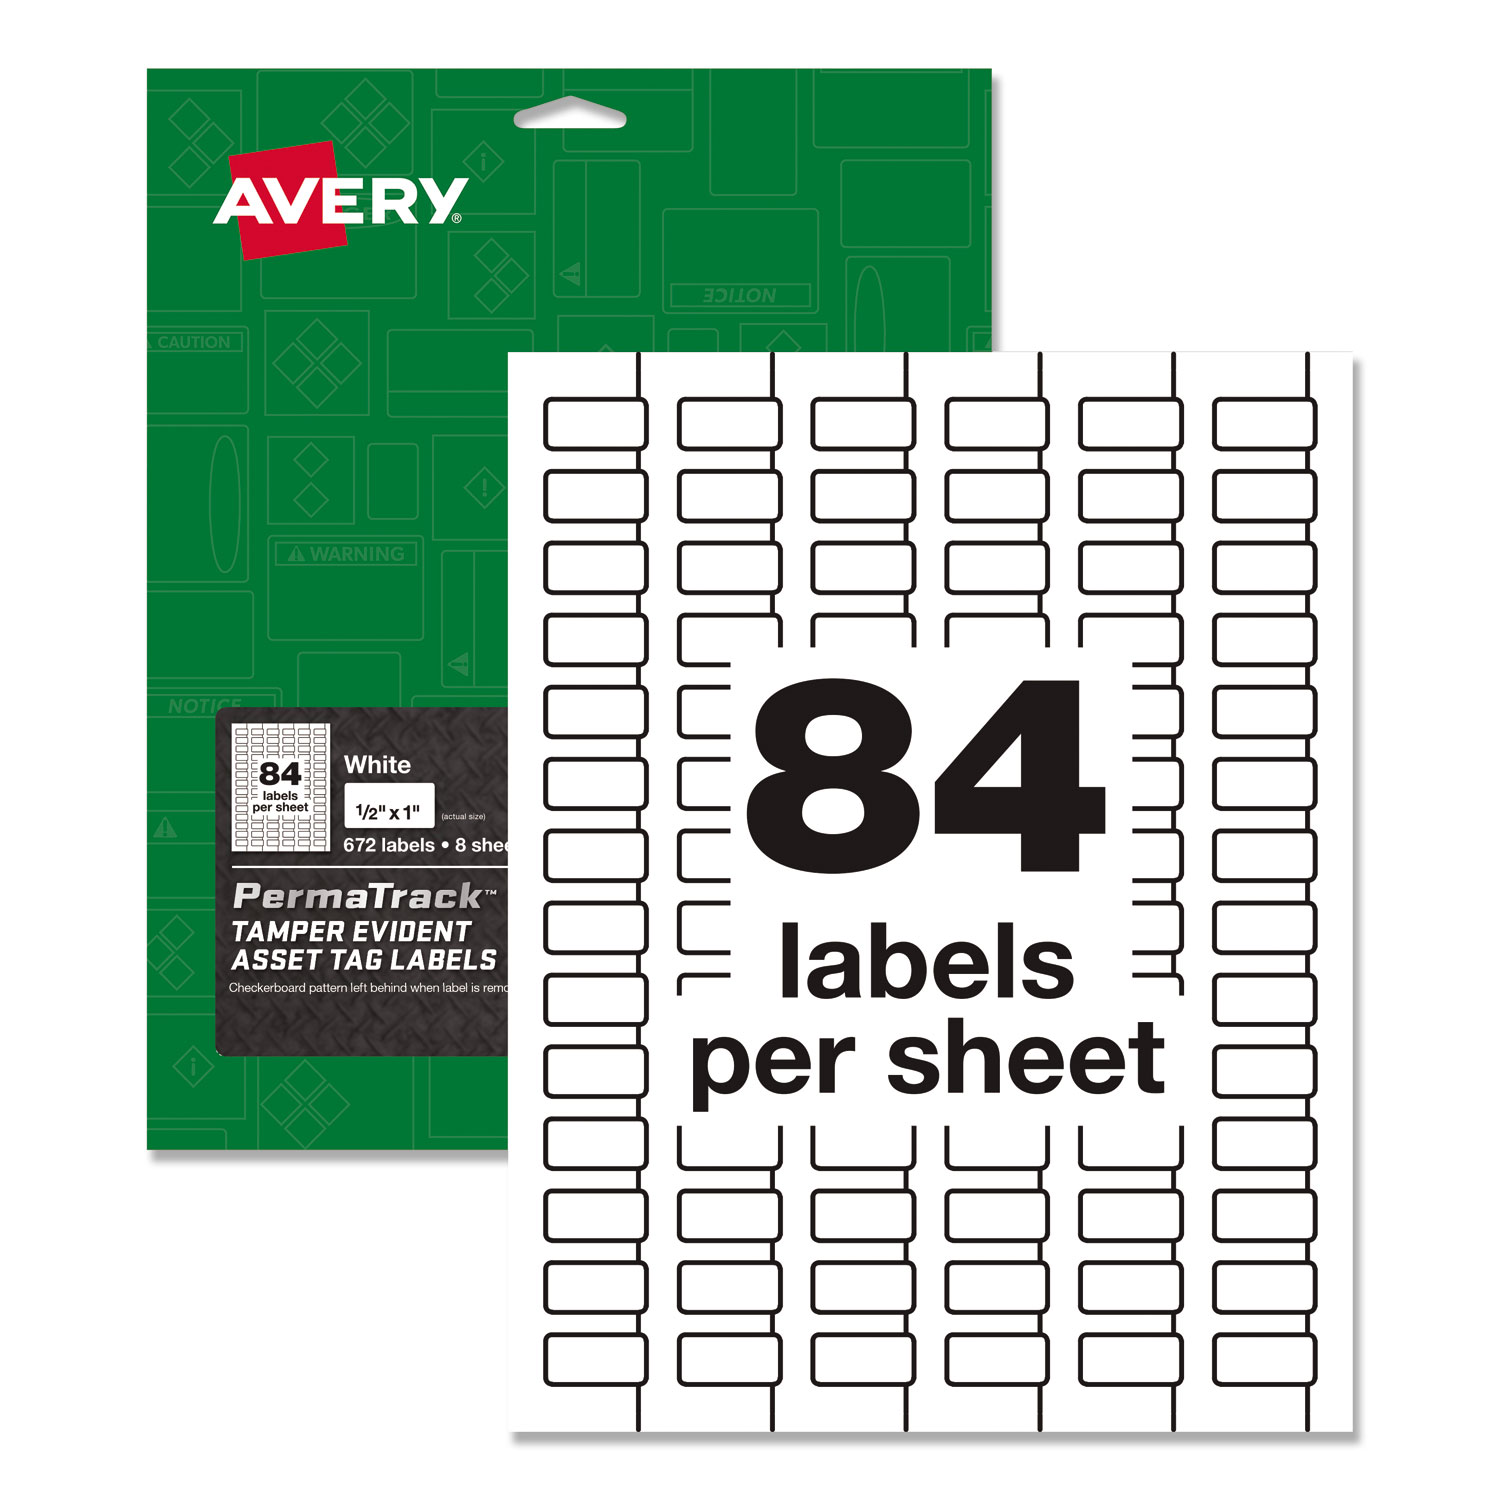  Avery 60534 PermaTrack Tamper-Evident Asset Tag Labels, Laser Printers, 0.5 x 1, White, 84/Sheet, 8 Sheets/Pack (AVE60534) 